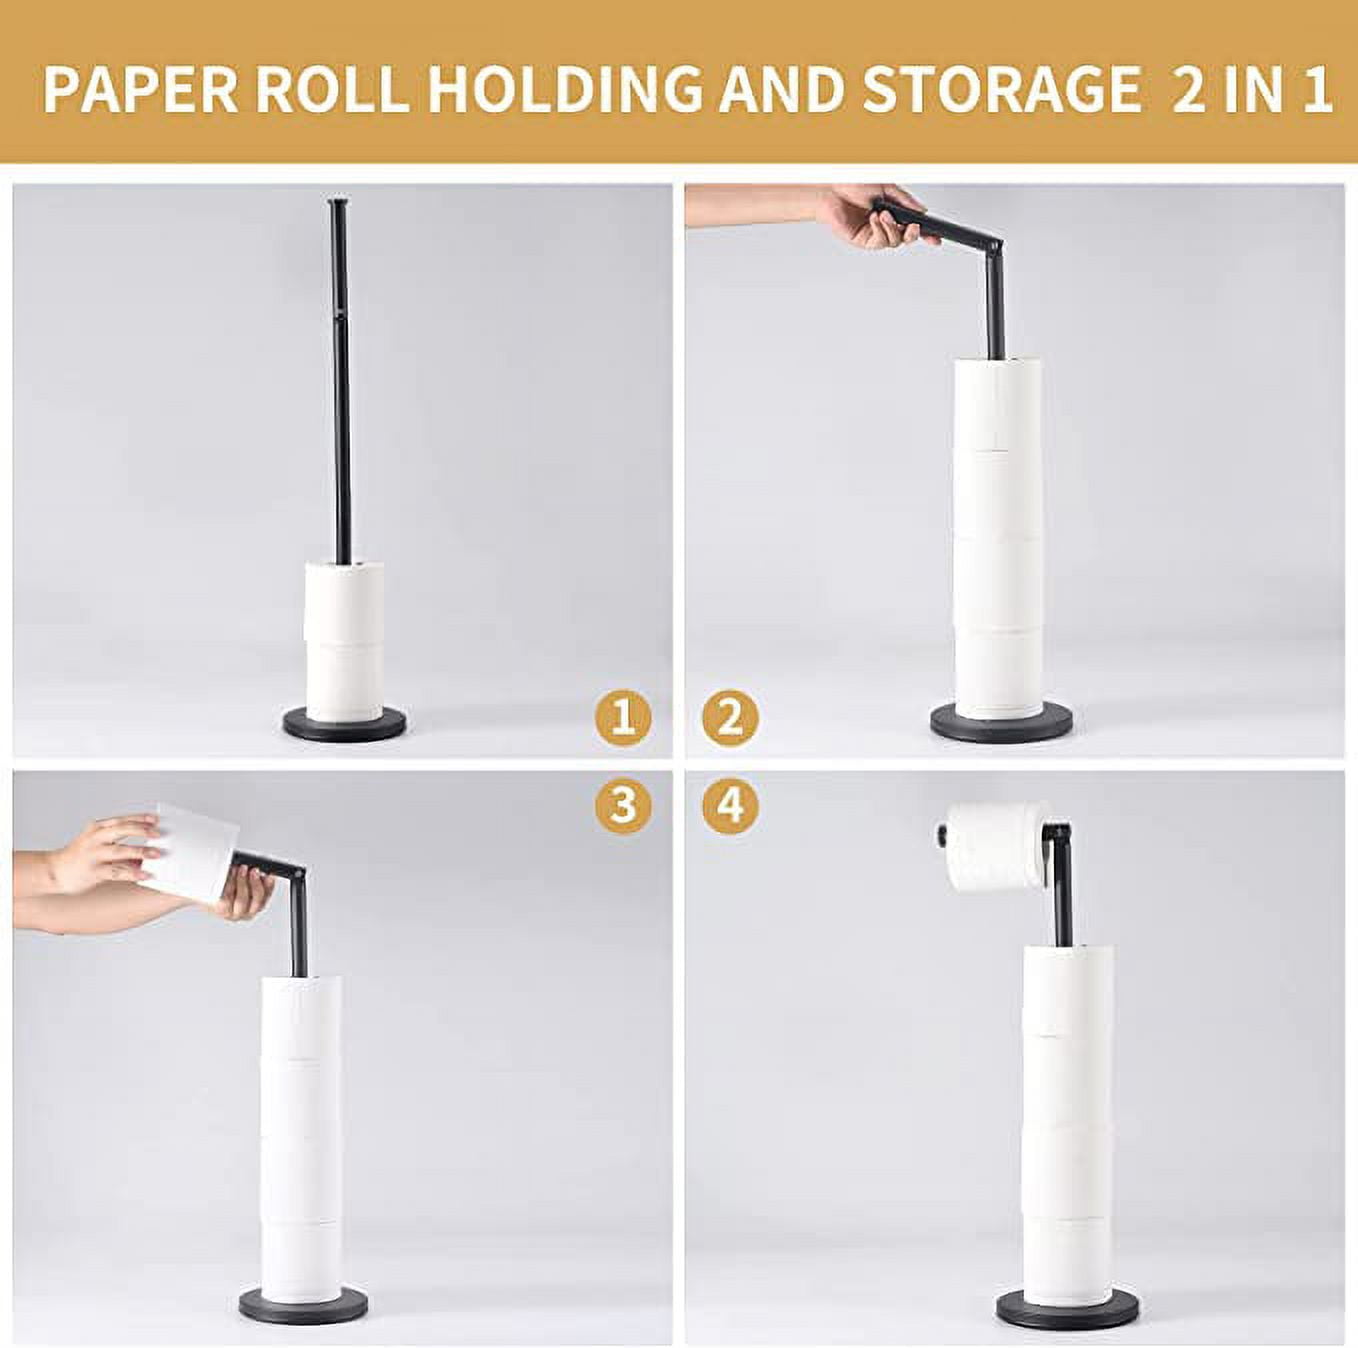  Ikloo Free Standing Toilet Paper Holder Stand ∣ Black Toilet  Paper Roll Holder with Top Storage Shelf for Phone, Wipe and More ∣ Ideal  Bathroom Accessories for Towel Paper Storage